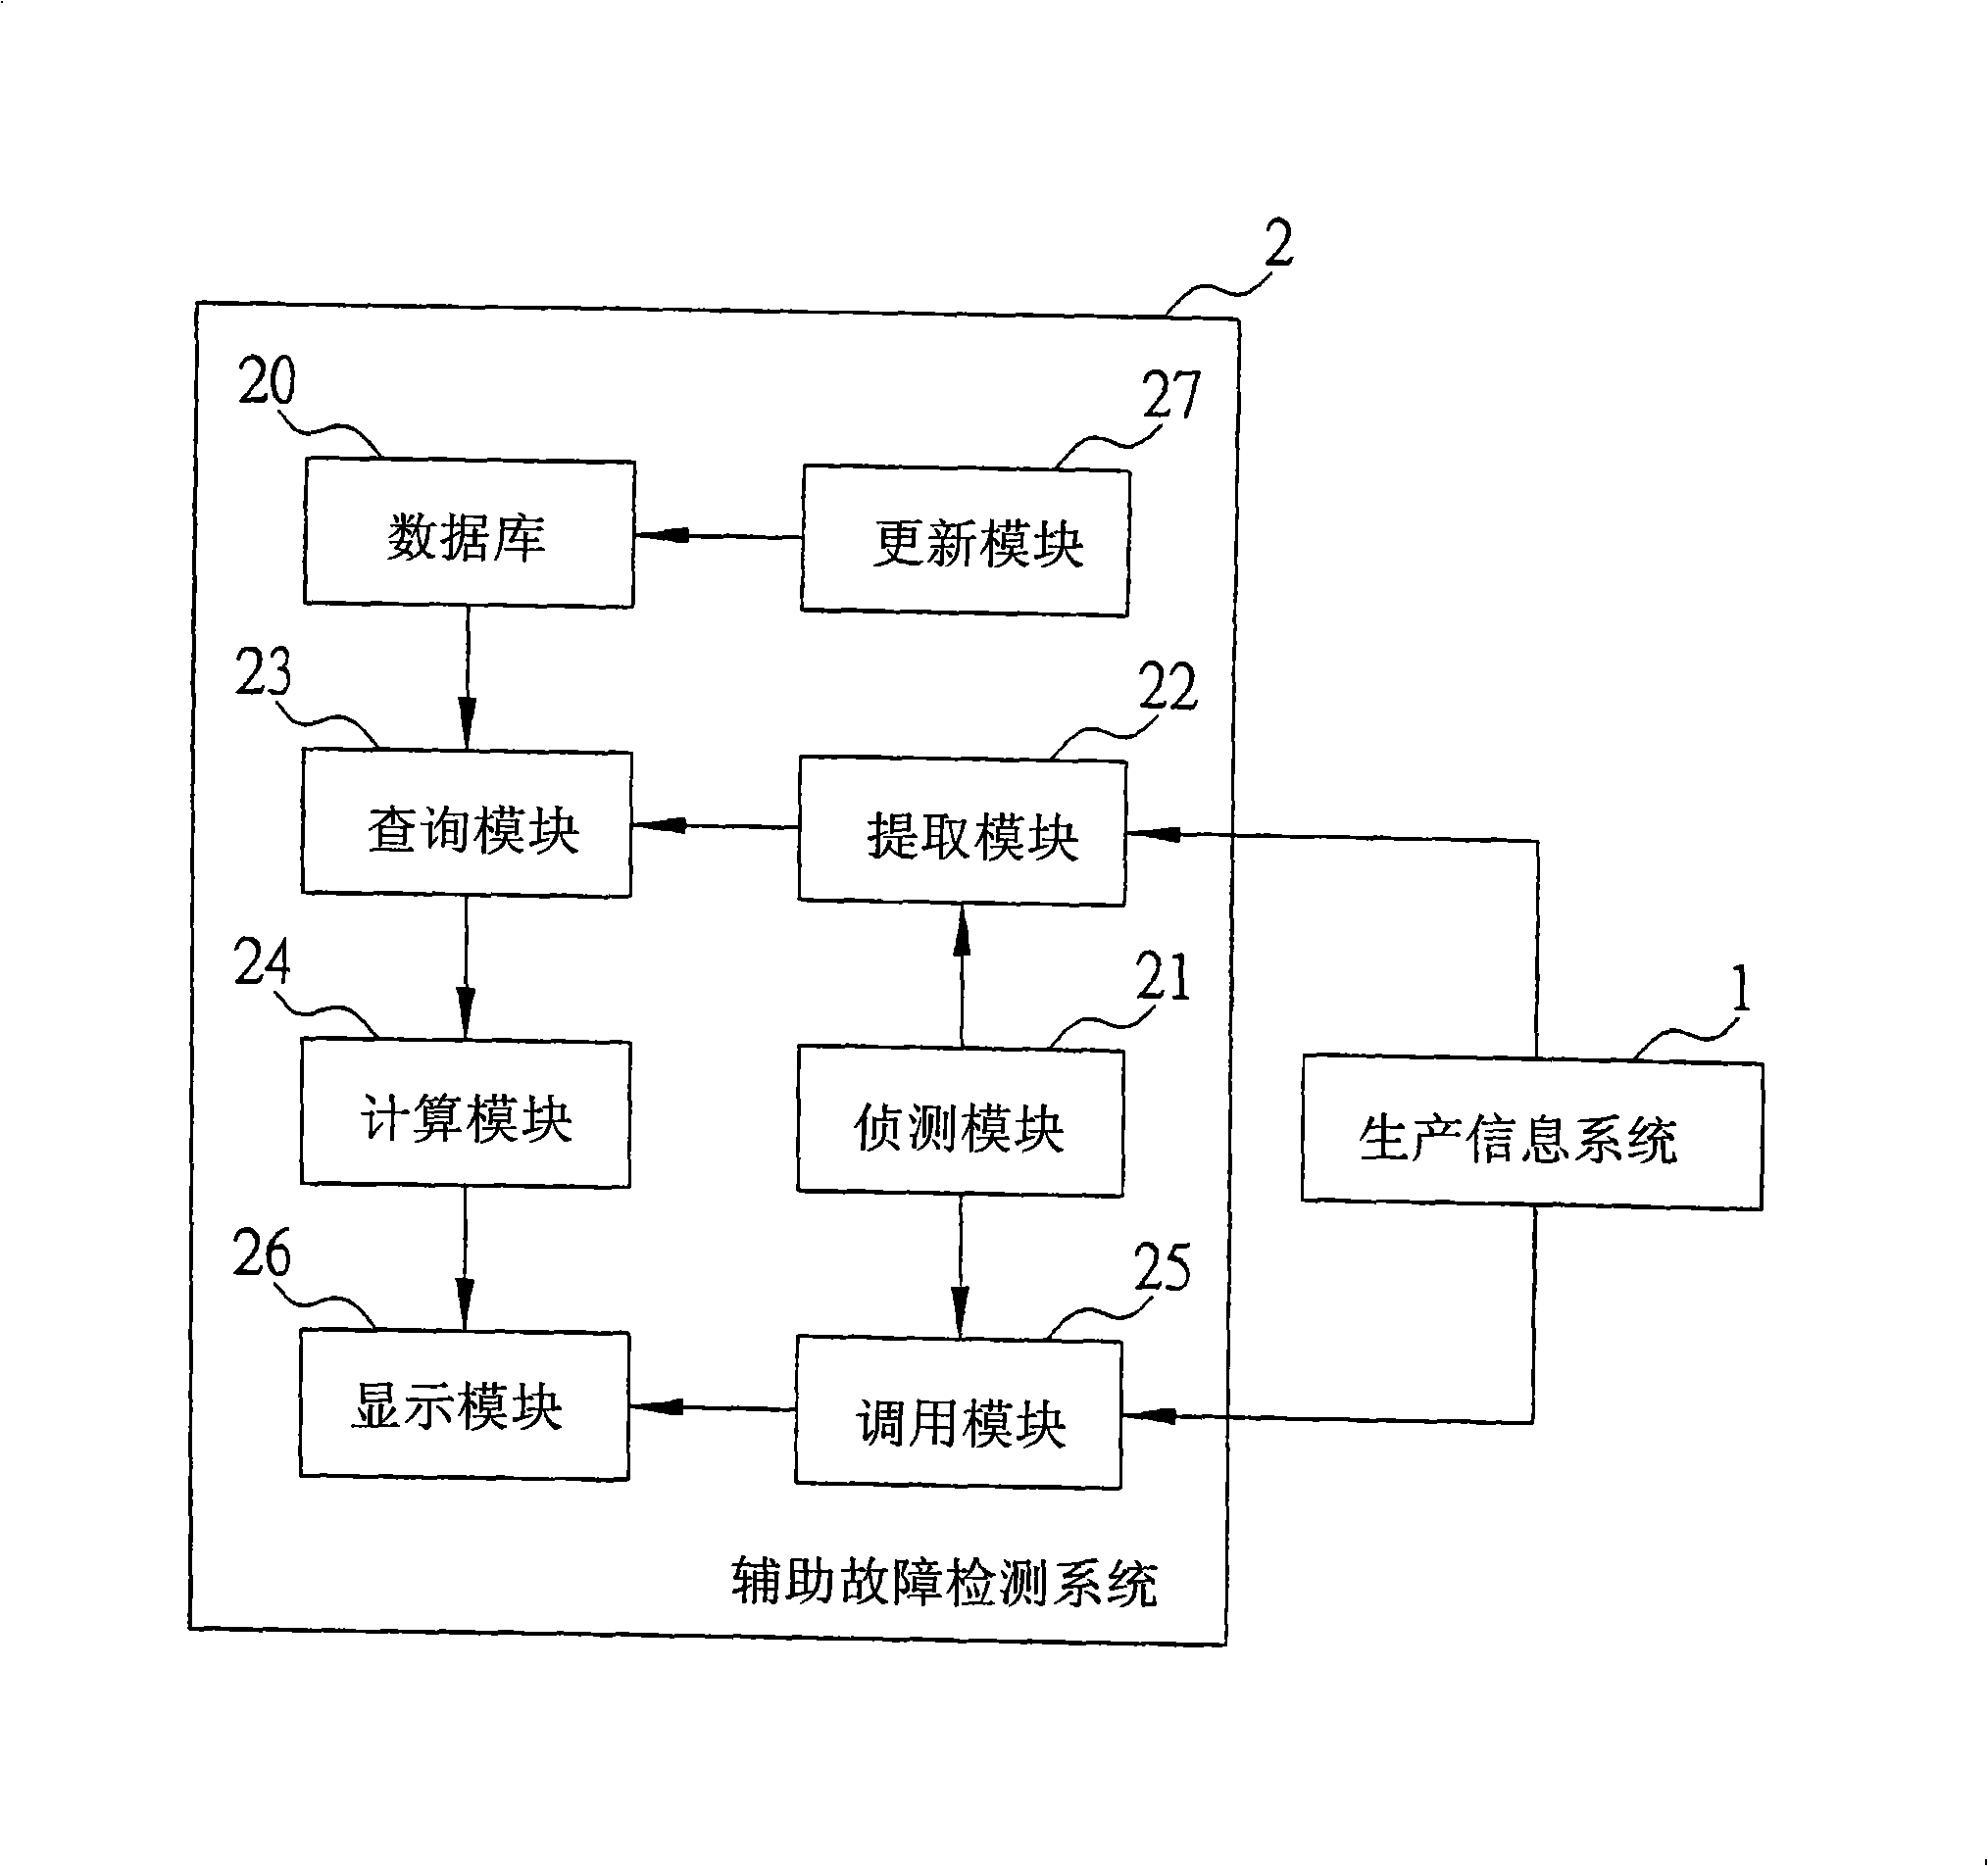 Auxiliary fault detection system and method